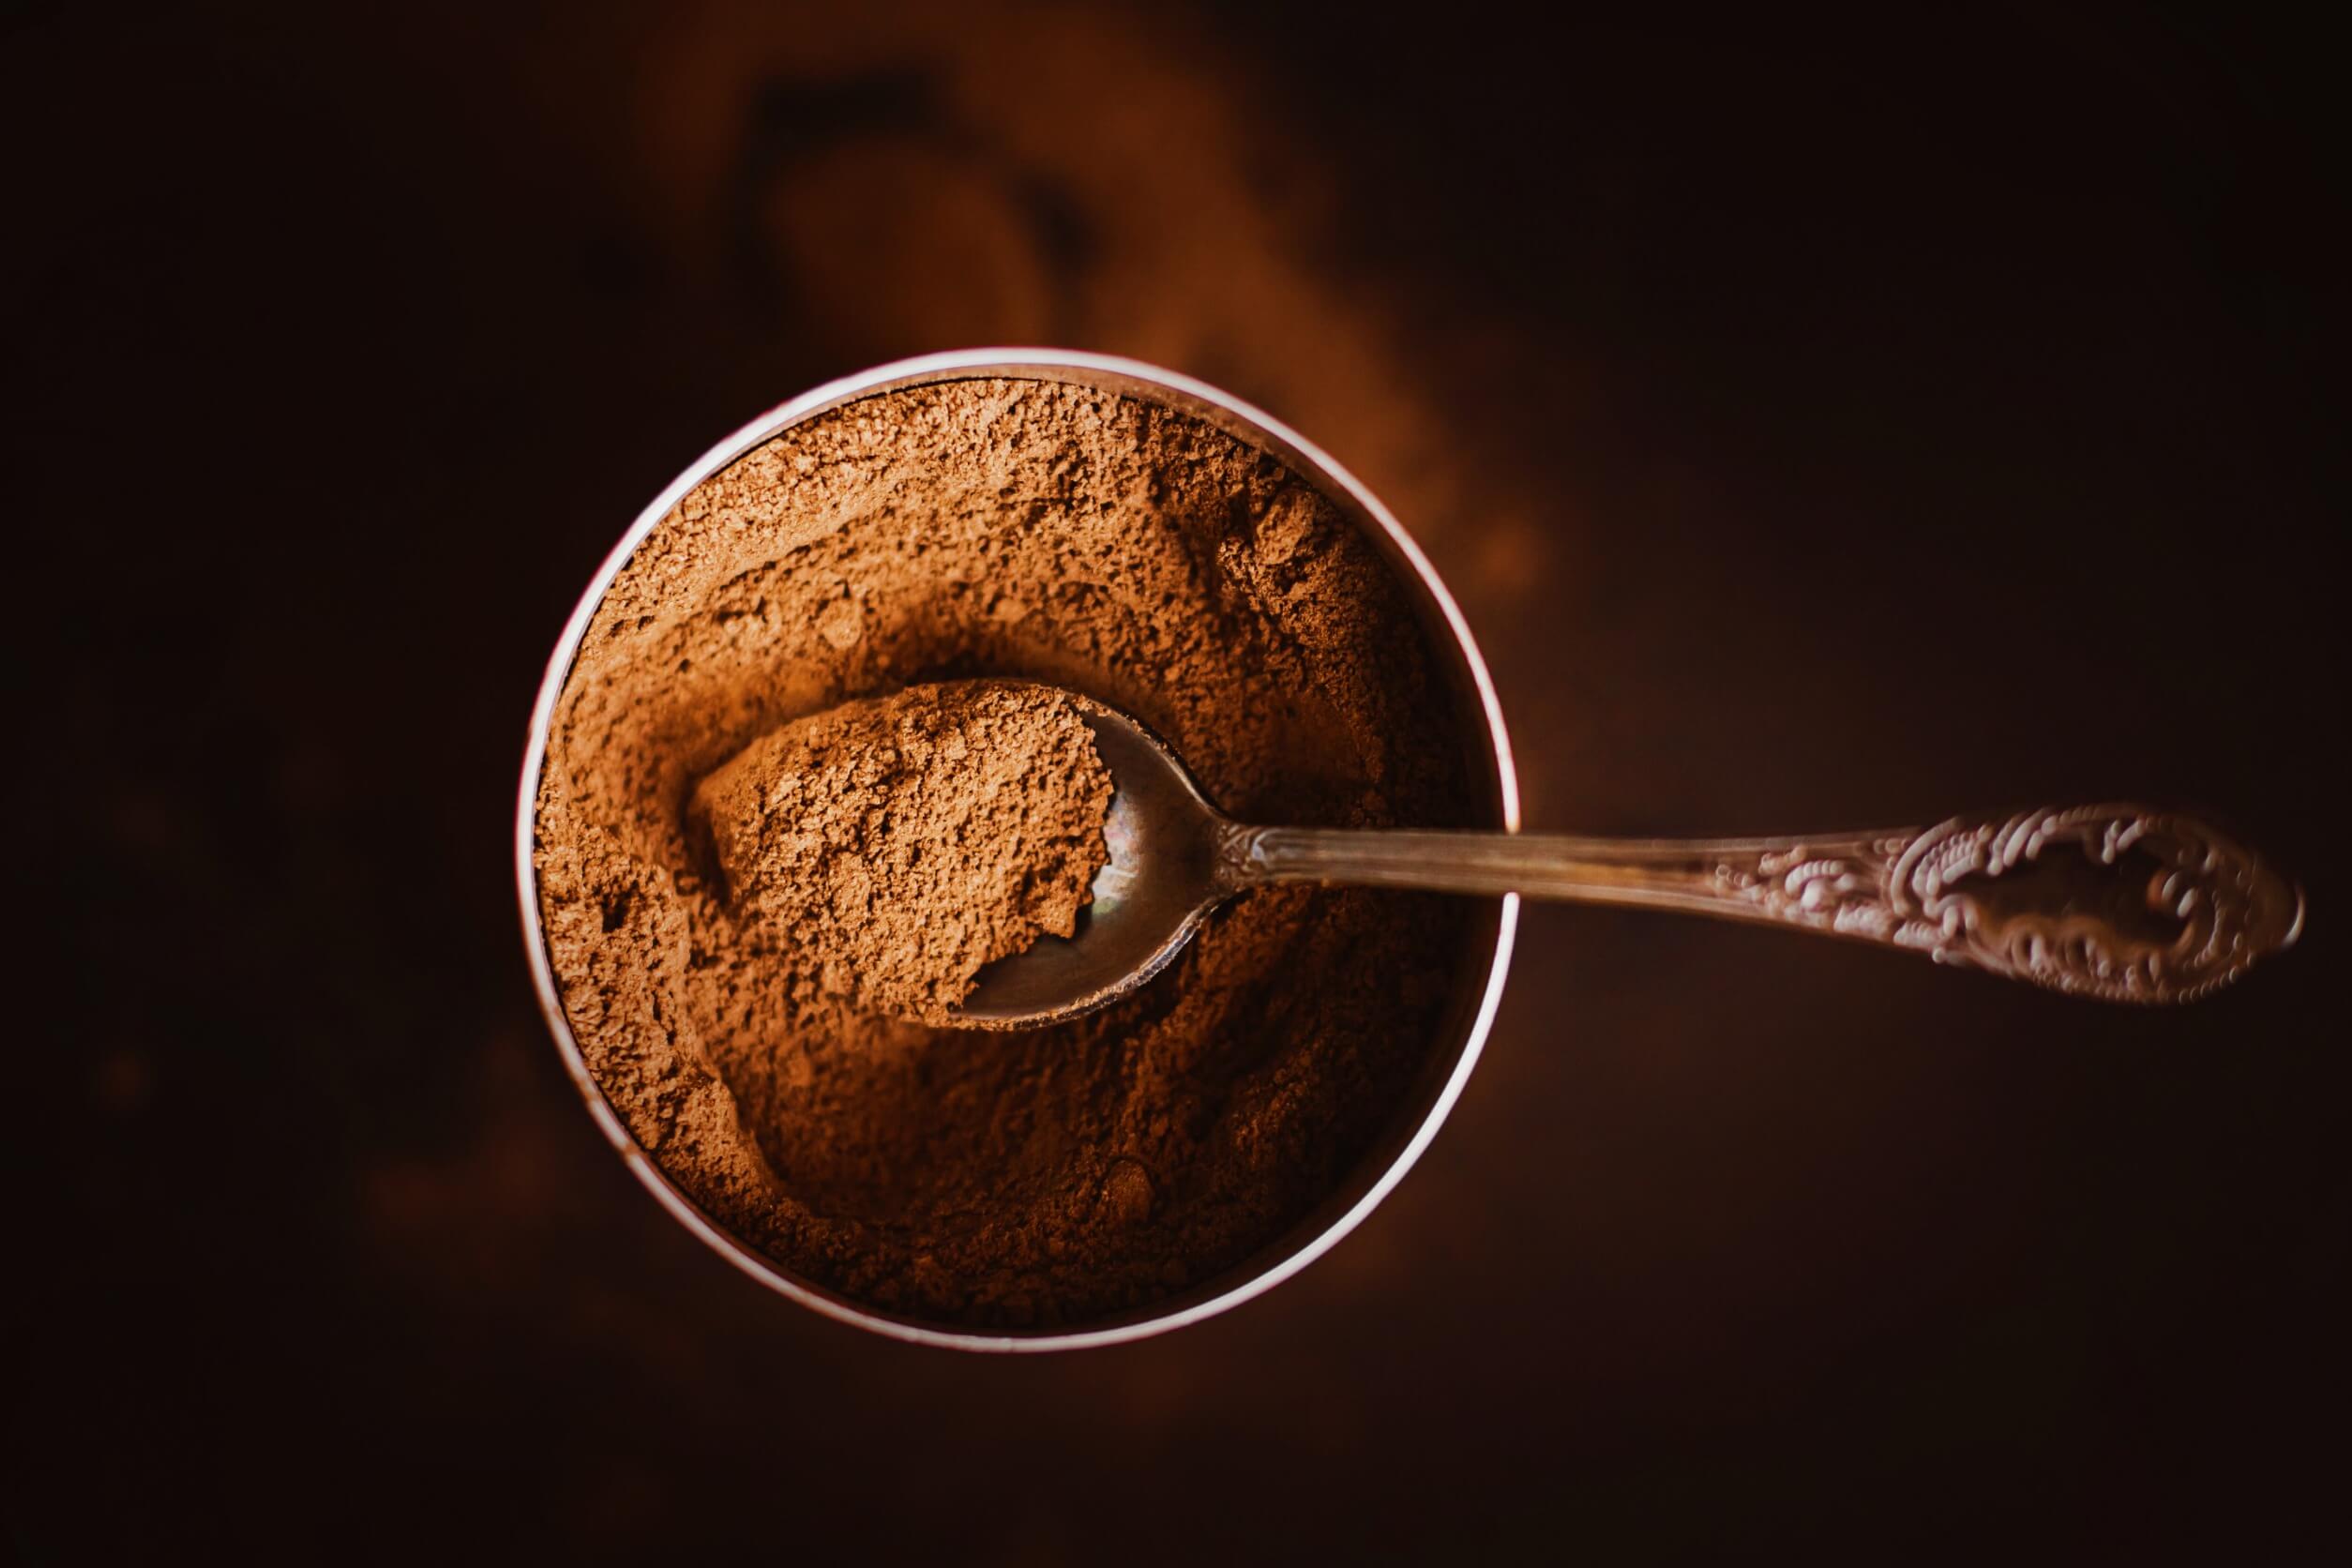 A siver spoon dipping into a metal canister full of cinnamon.